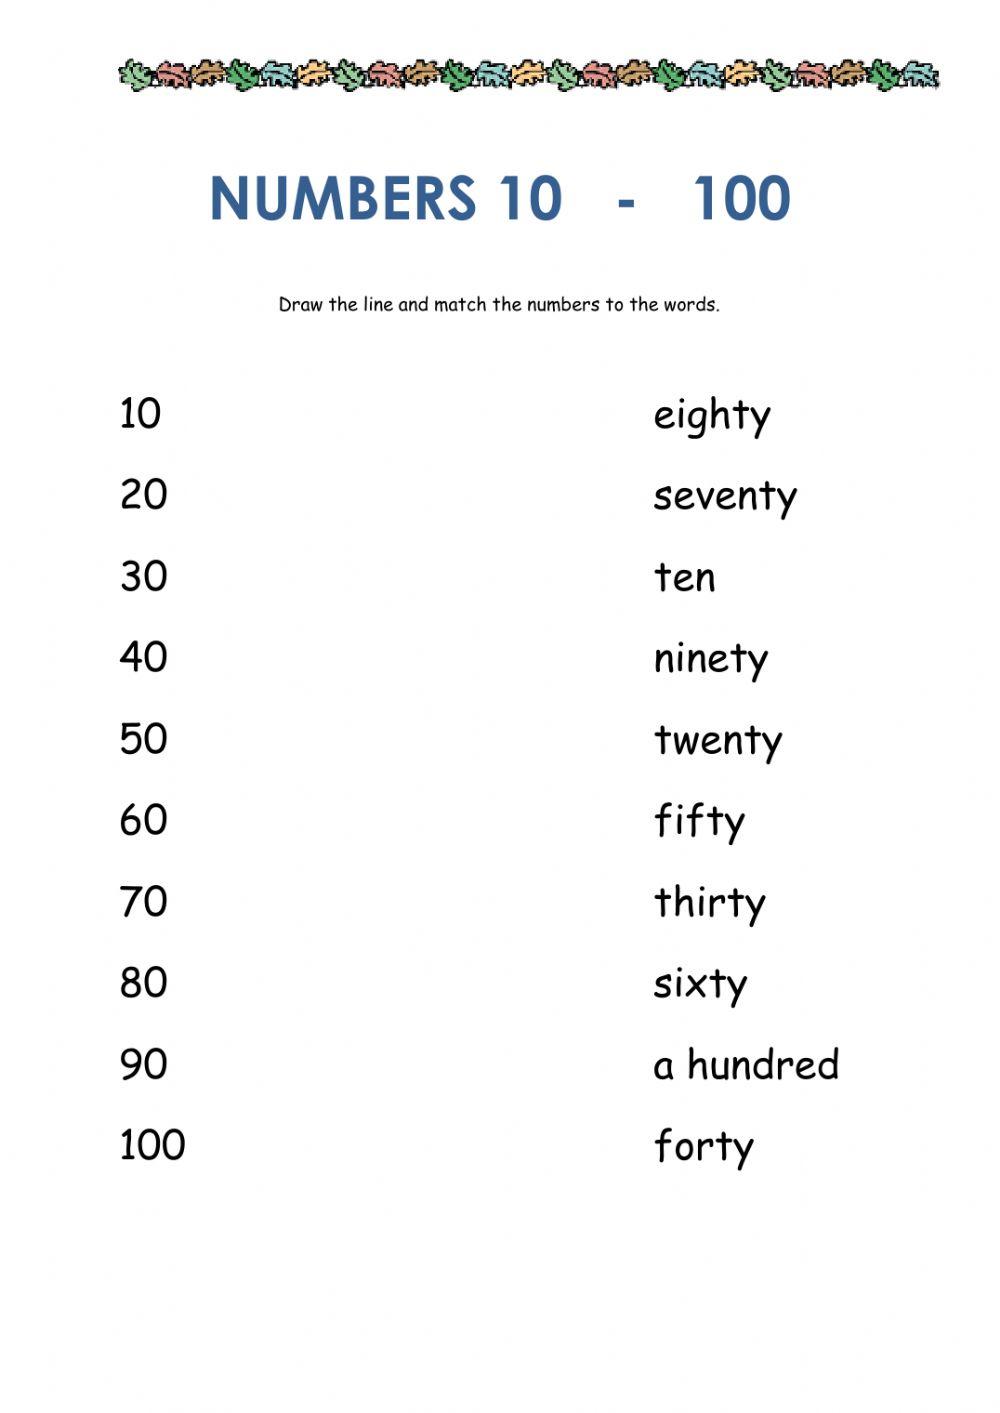 Numbers 10-100